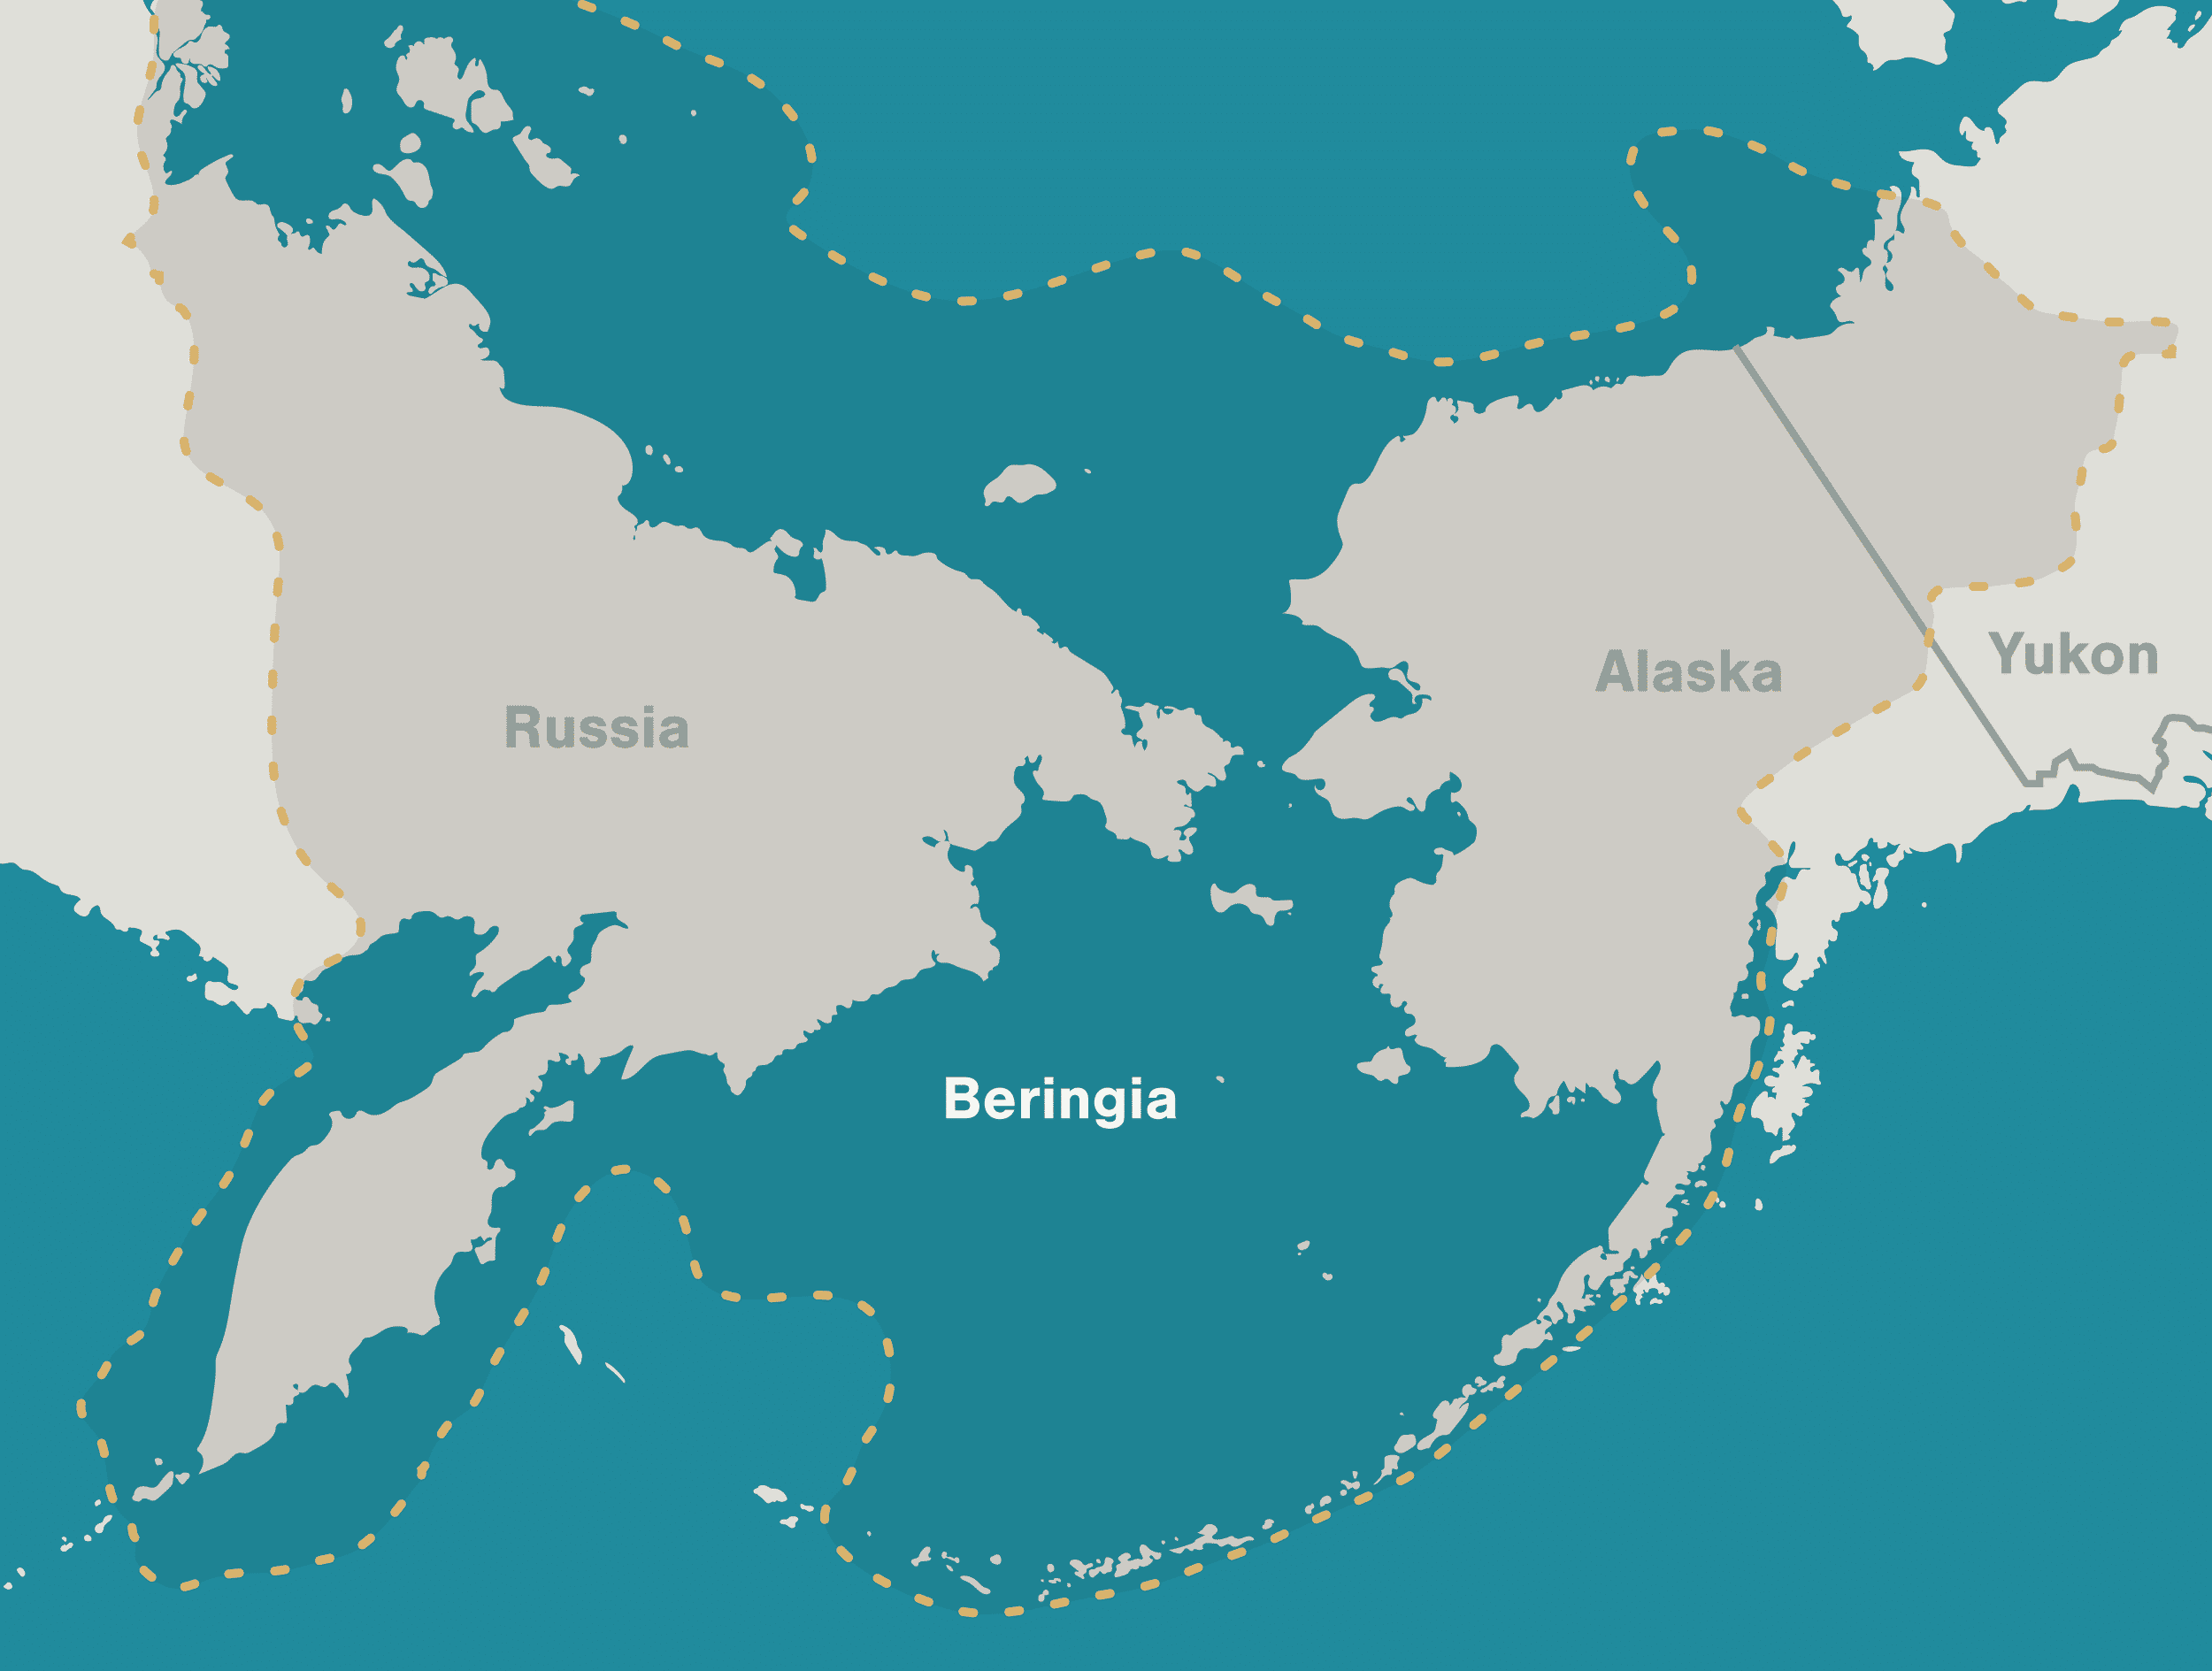 An outline of Beringia